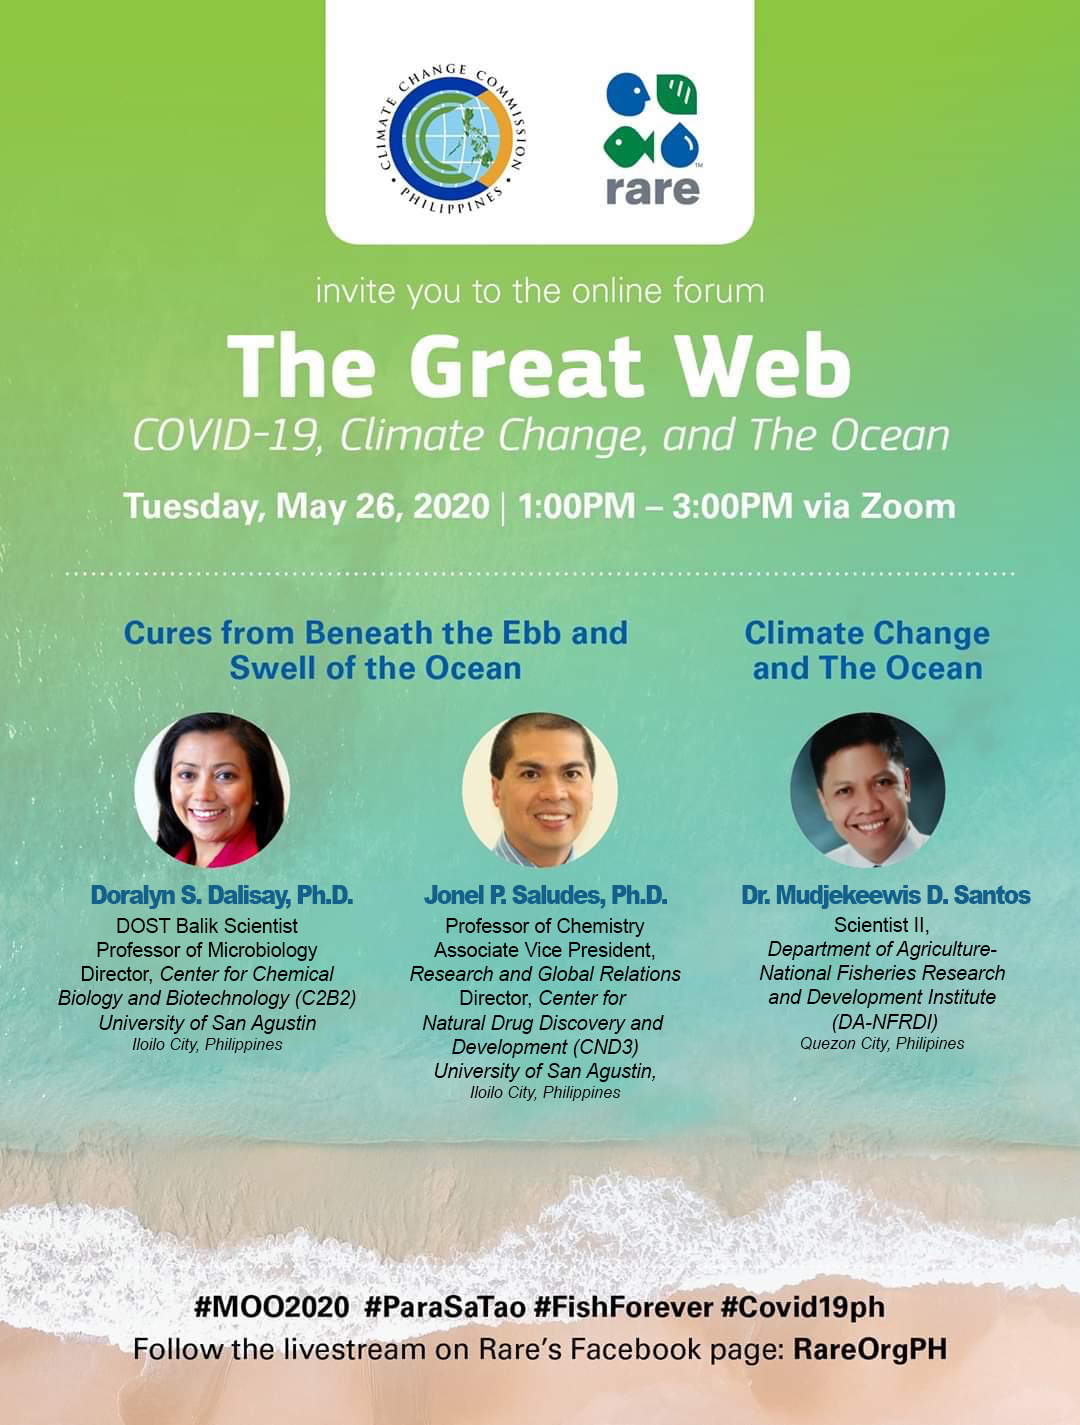 The Great Web: COVID-19, Climate Change, and The Ocean